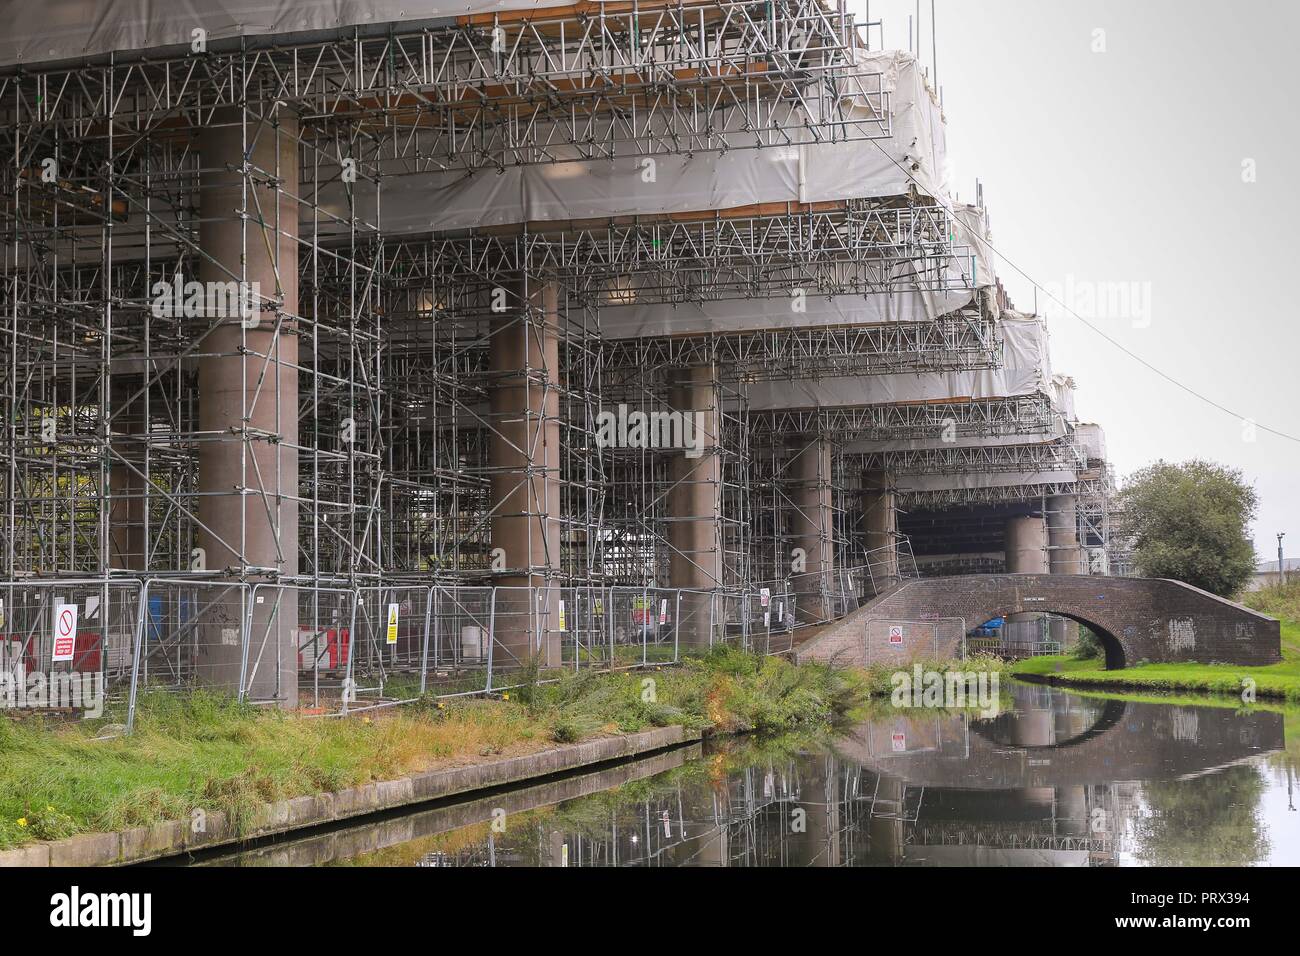 Oldbury, West Midlands, UK. 5th October, 2018. Scaffolding under the Oldbury Viaduct section of the M5 motorway. Highways England have said that essential repairs between junctions 1 and 2 will now not finish until spring 2019 due to the exceptional hot weather this summer. The news is not welcomed by motorists who have had to endure long delays due to lane closures and speed restrictions of 30mph on that stretch. The Oldbury Viaduct M5 carries 120,000 vehicles a day. Peter Lopeman/Alamy Live News Stock Photo